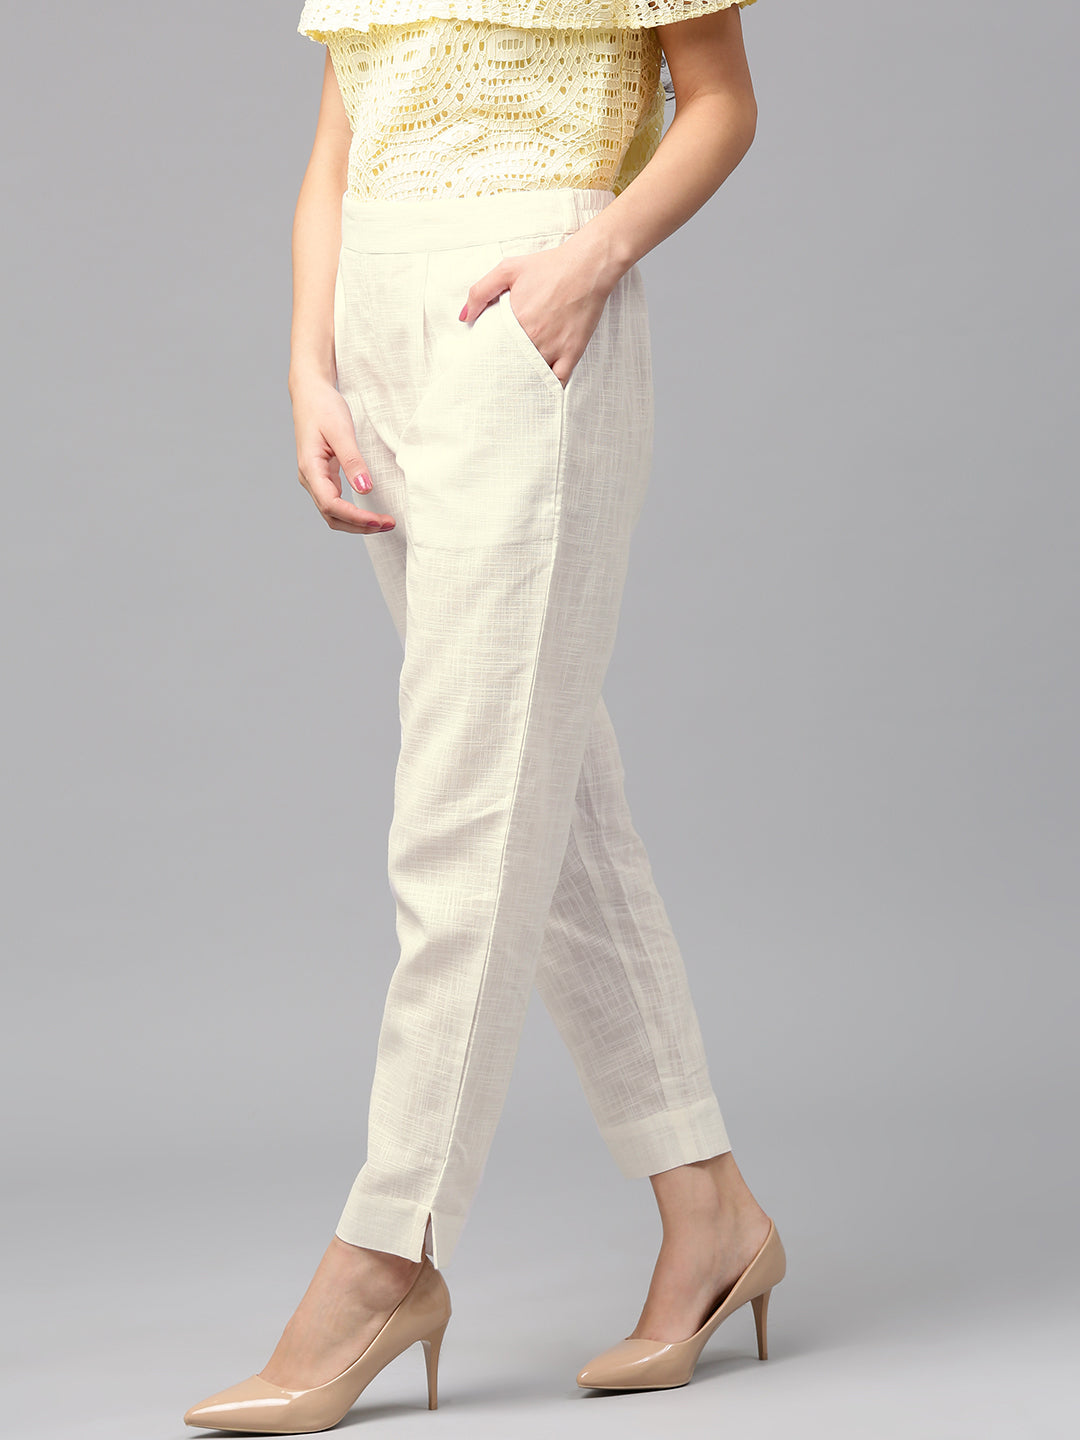 Women's White Pant Suits for sale in Memphis, Tennessee